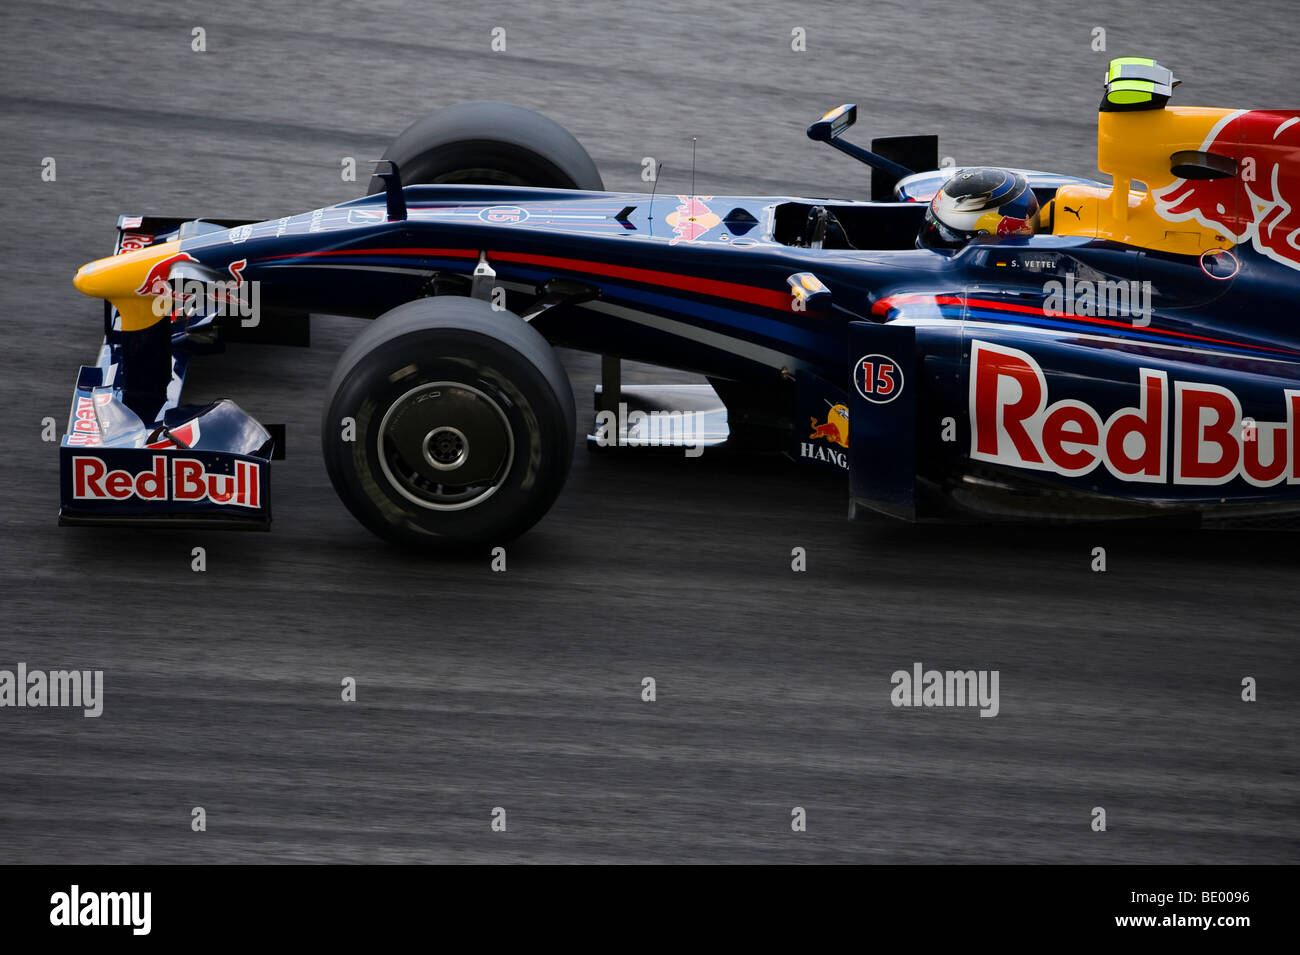 Red Bull Racing driver Sebastian Vettel of Germany steers his car during the 2009 Fia Formula One Malasyan Grand Prix at the Sep Stock Photo